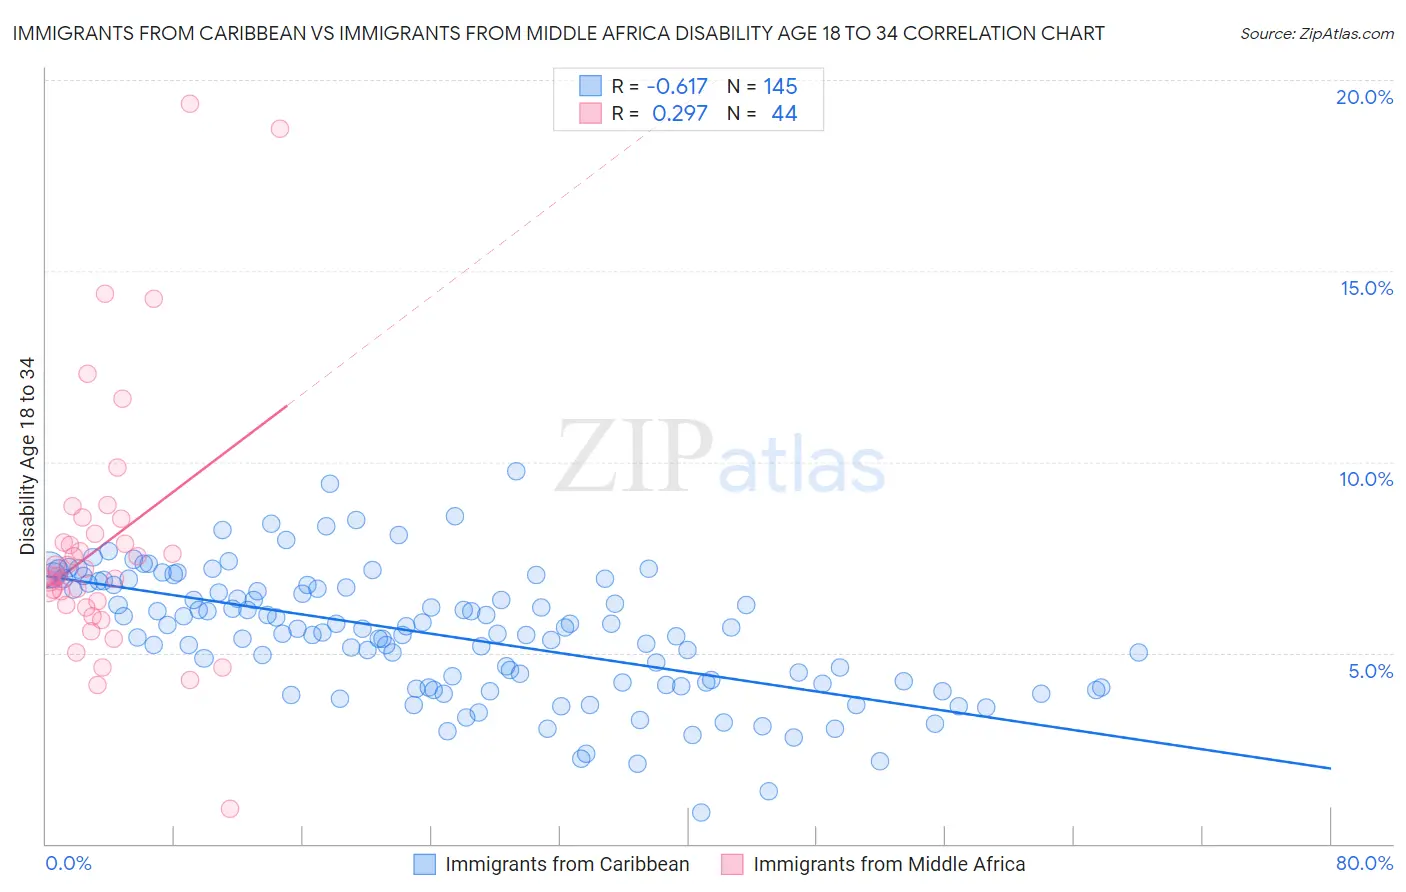 Immigrants from Caribbean vs Immigrants from Middle Africa Disability Age 18 to 34